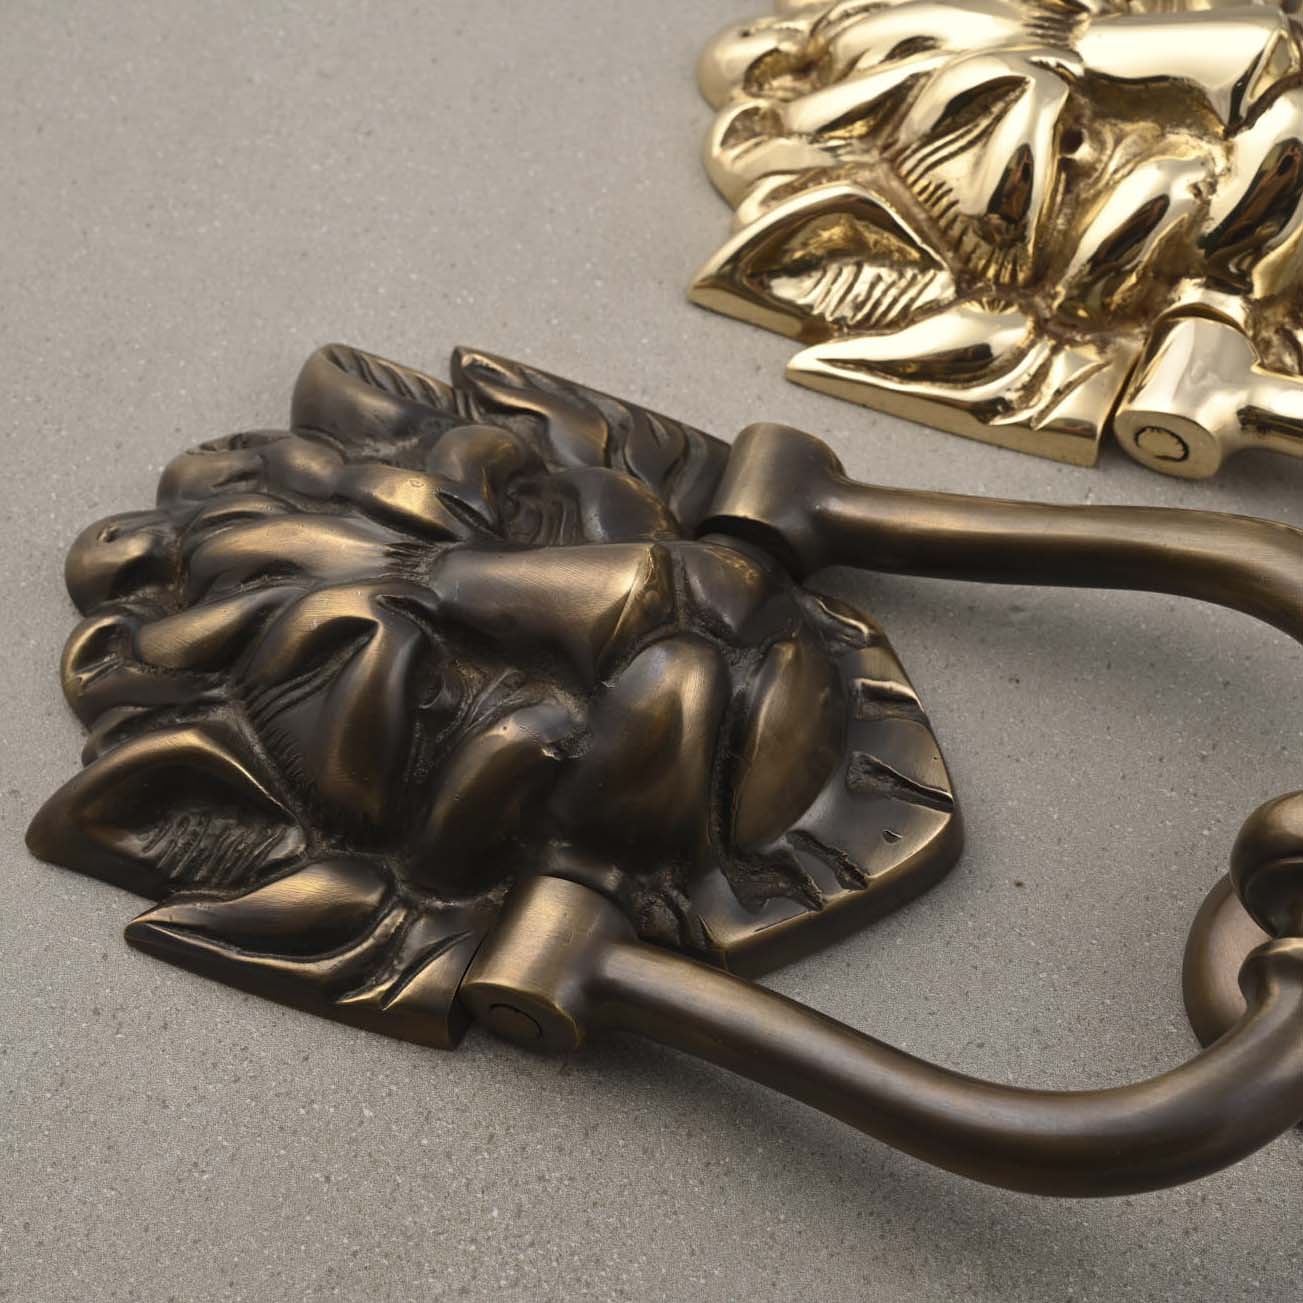 Downing St. Lion's Head Door Knocker Solid Brass Yester Home